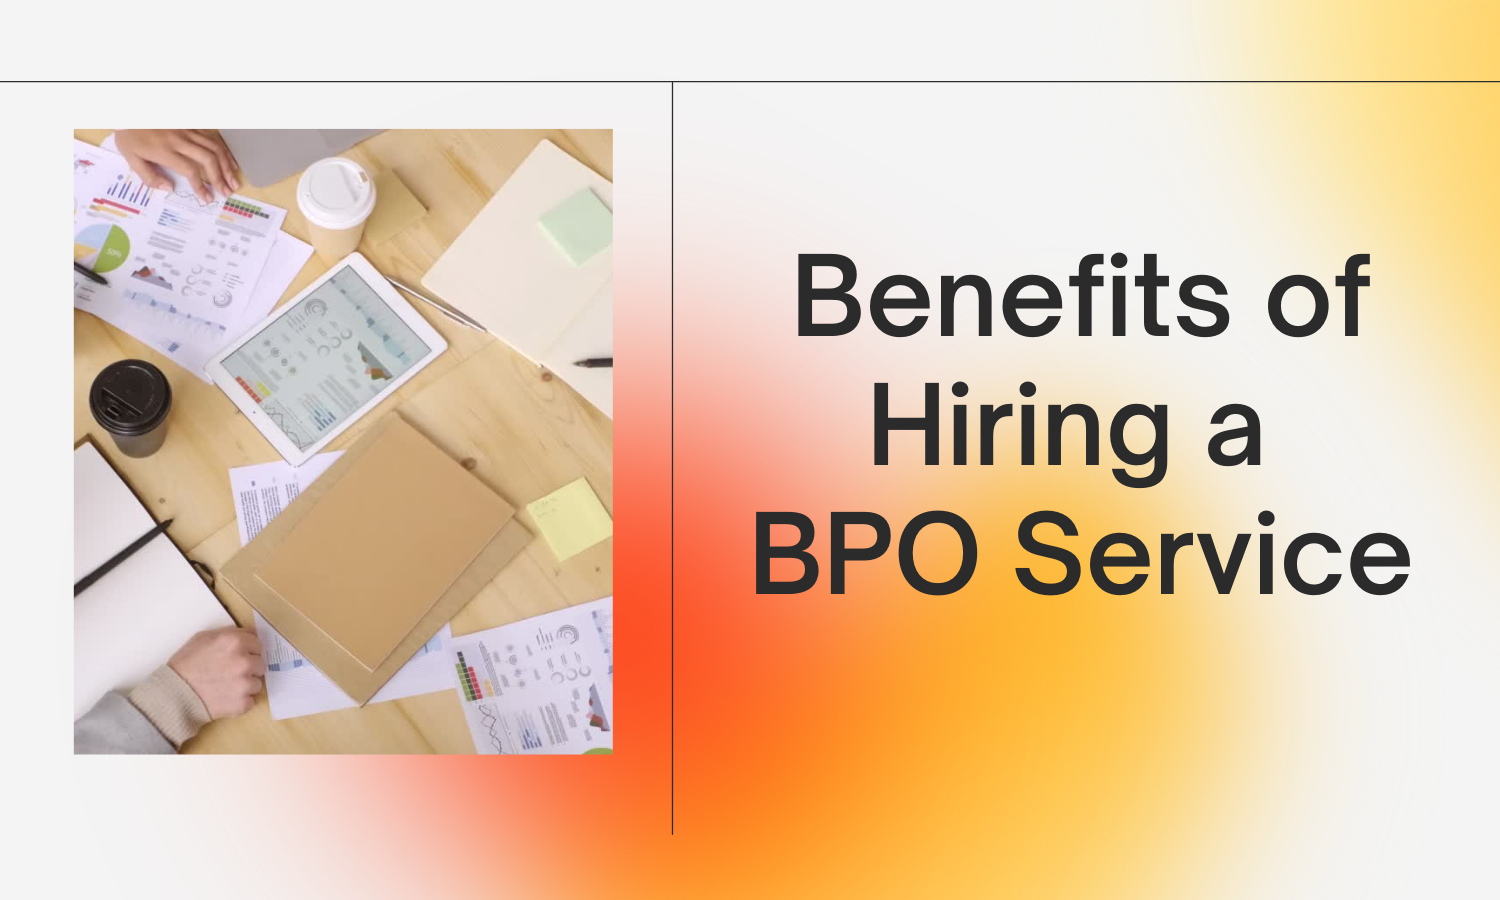 What are the Benefits of Hiring a BPO Service